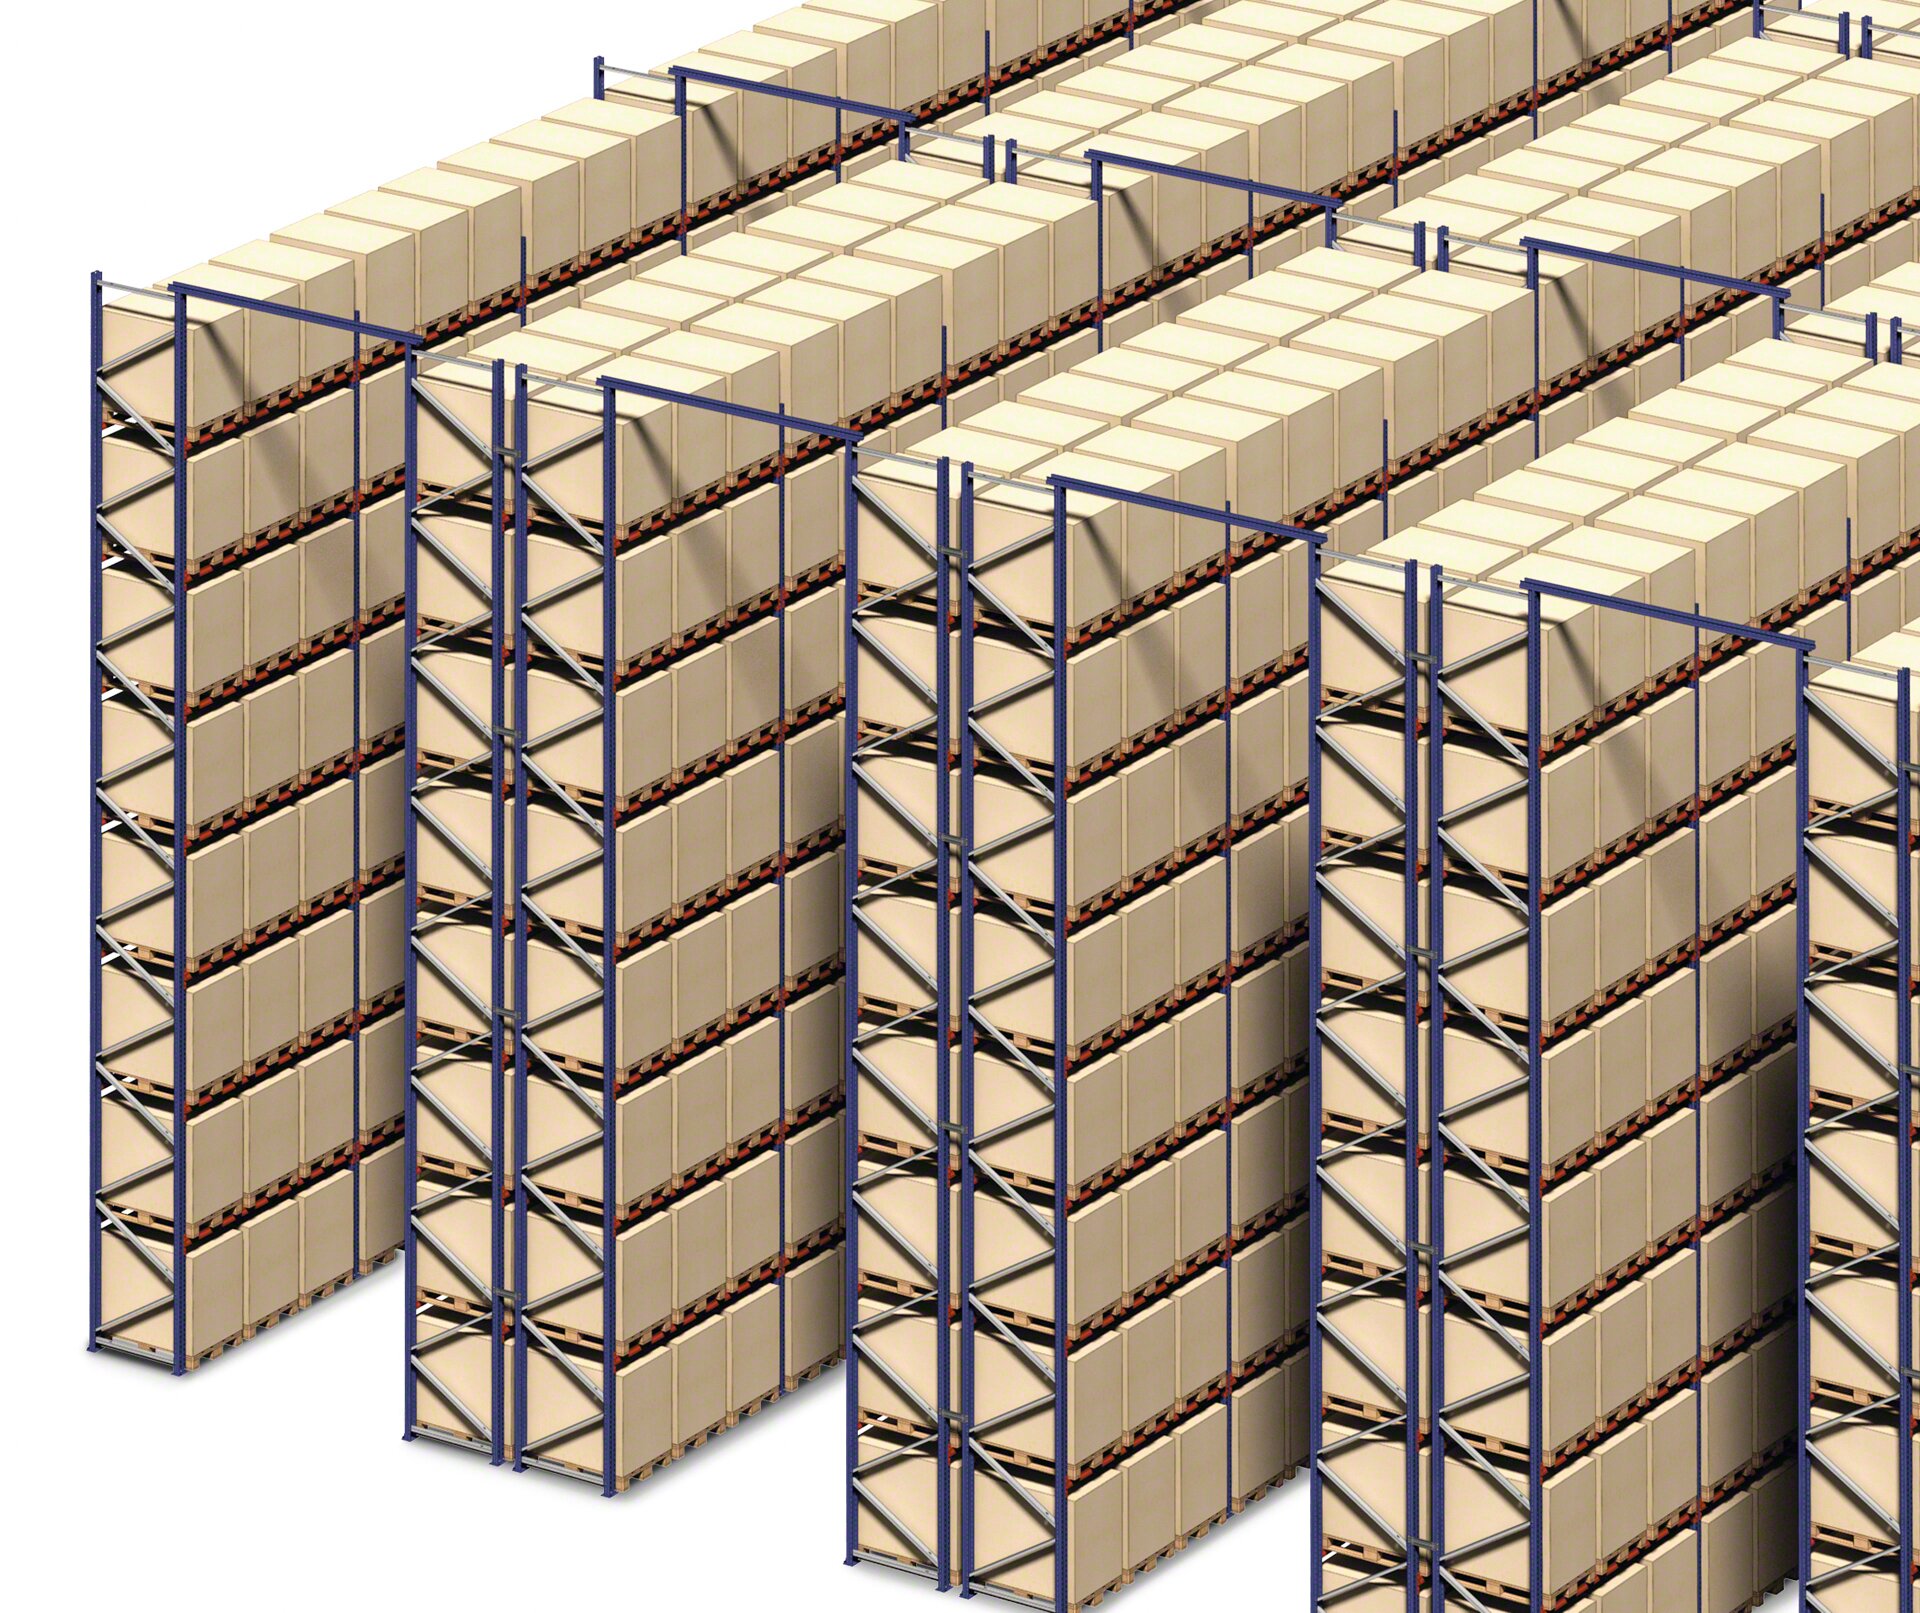 The portal ties at the top of the pallet racks enhance safety